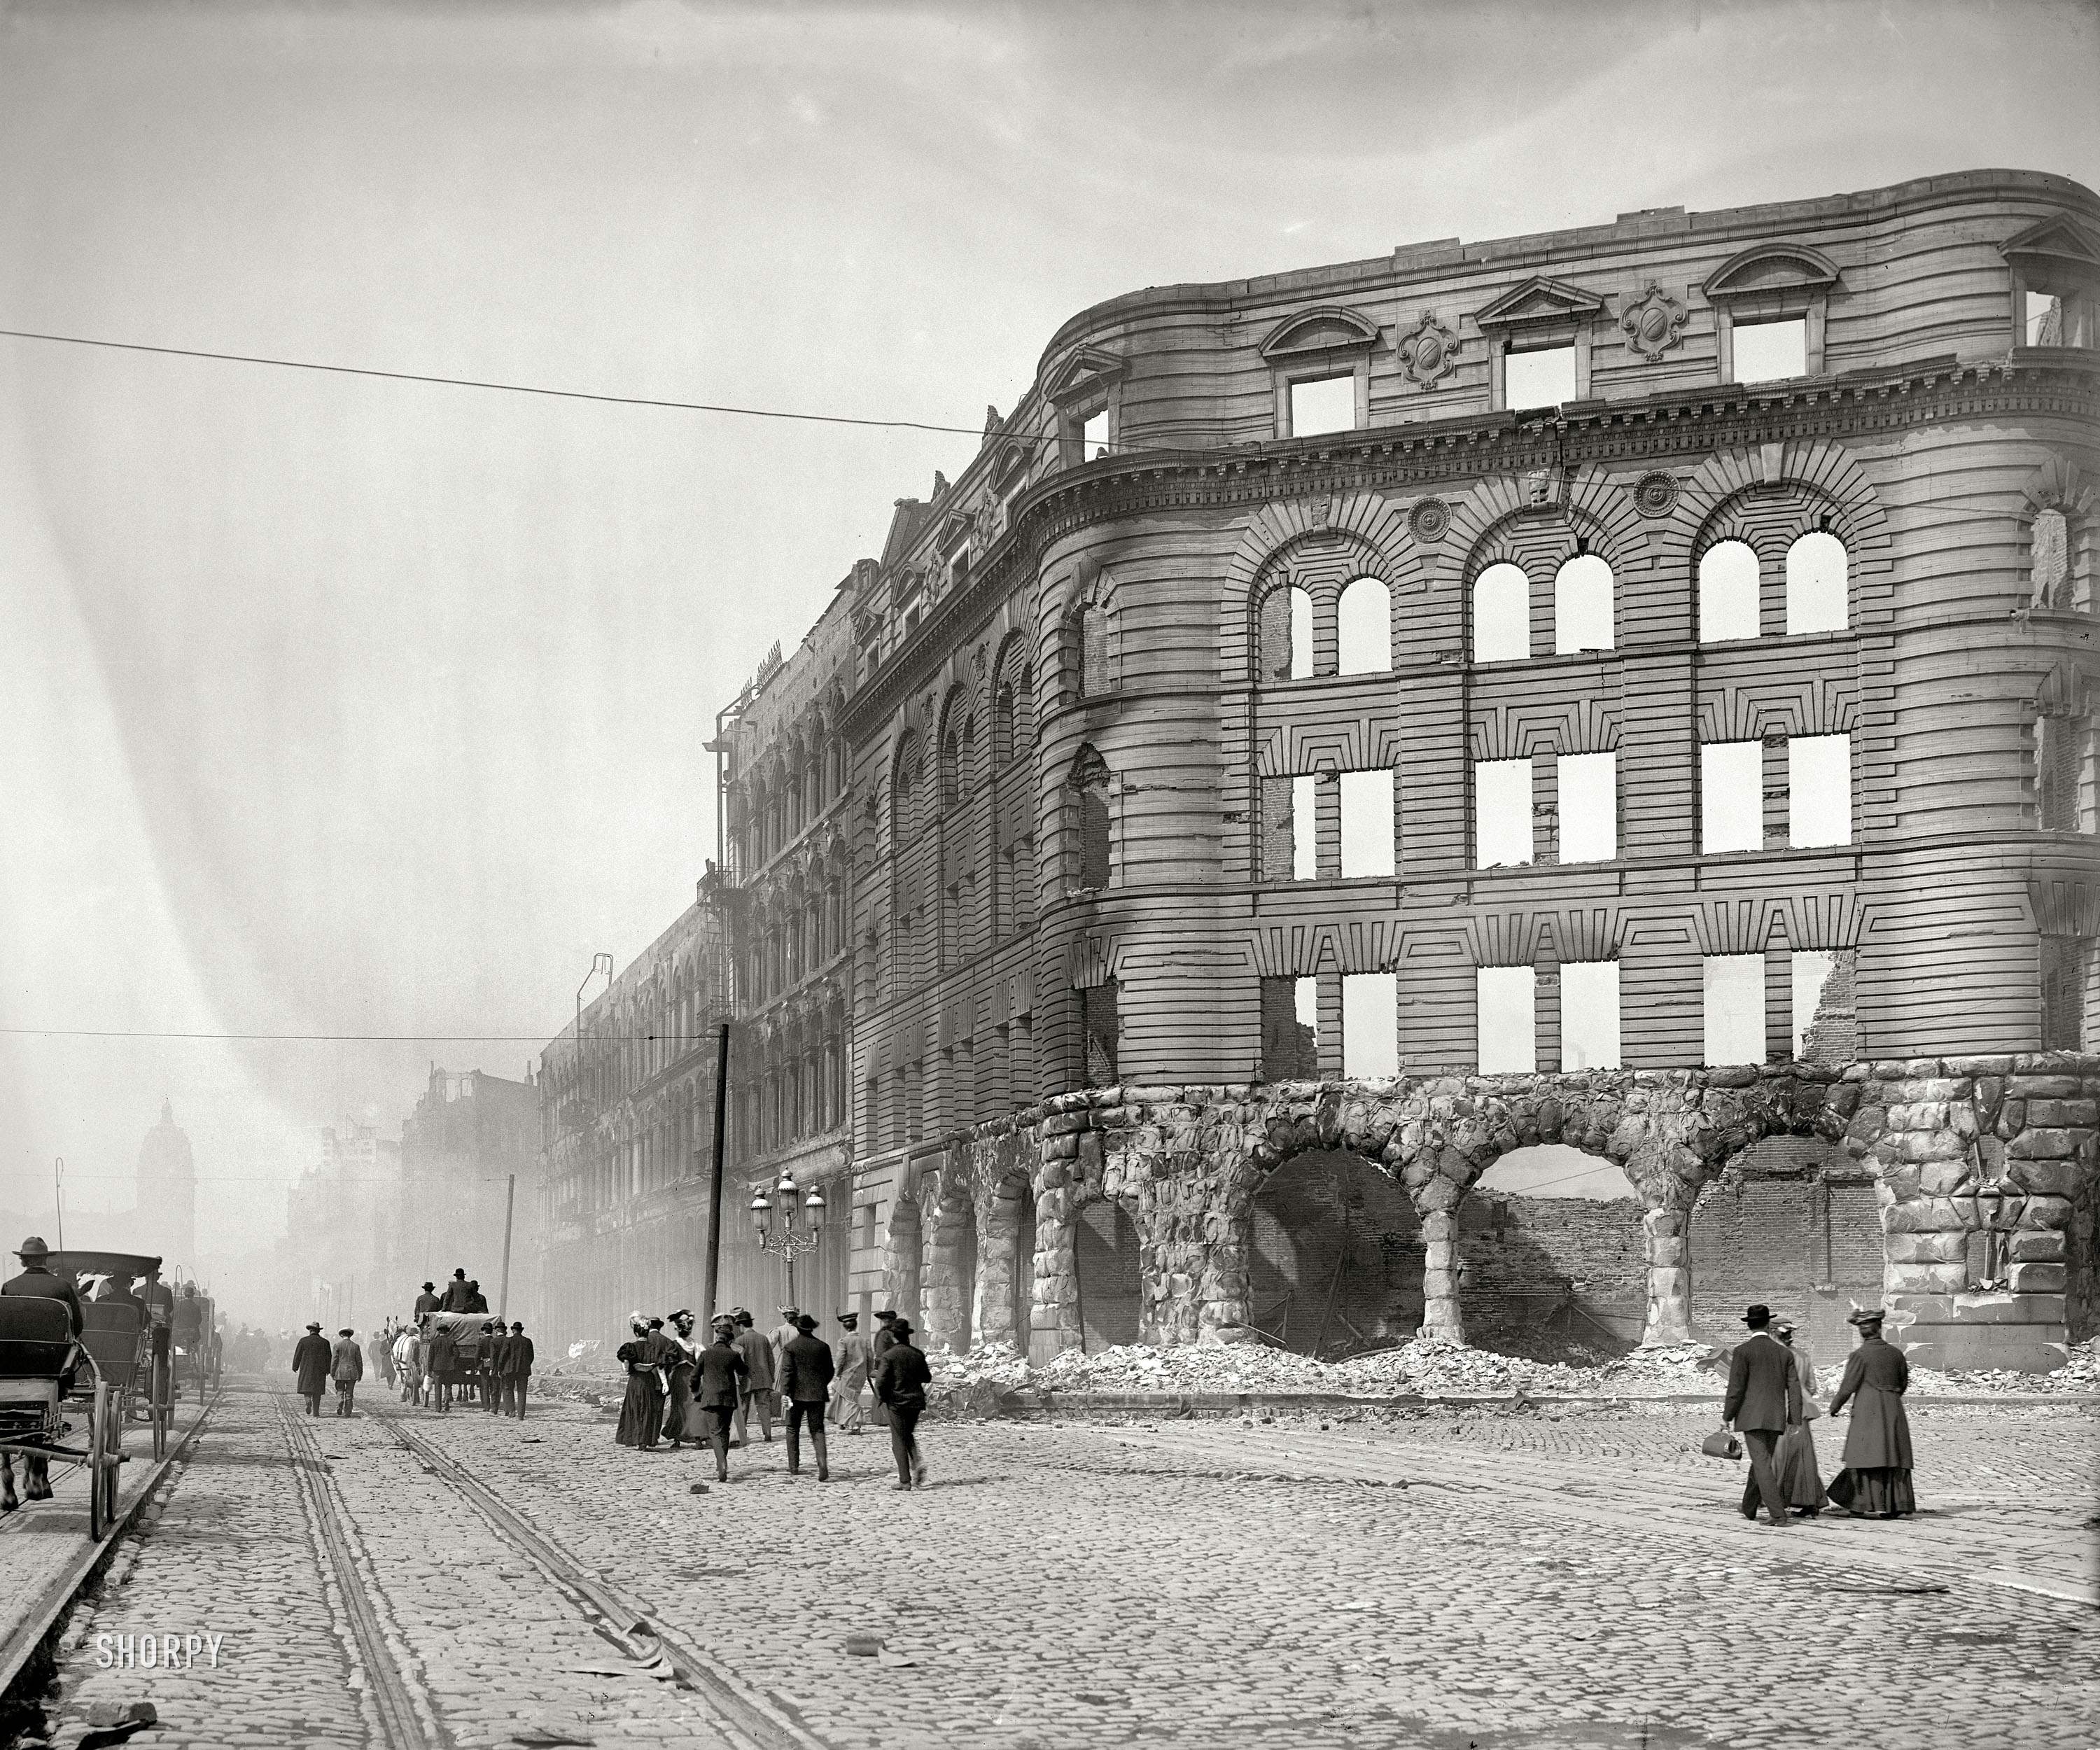 "Looking up Market St. from near Ferry." Another look at San Francisco in the aftermath of the earthquake and fire of April 18, 1906. View full size.